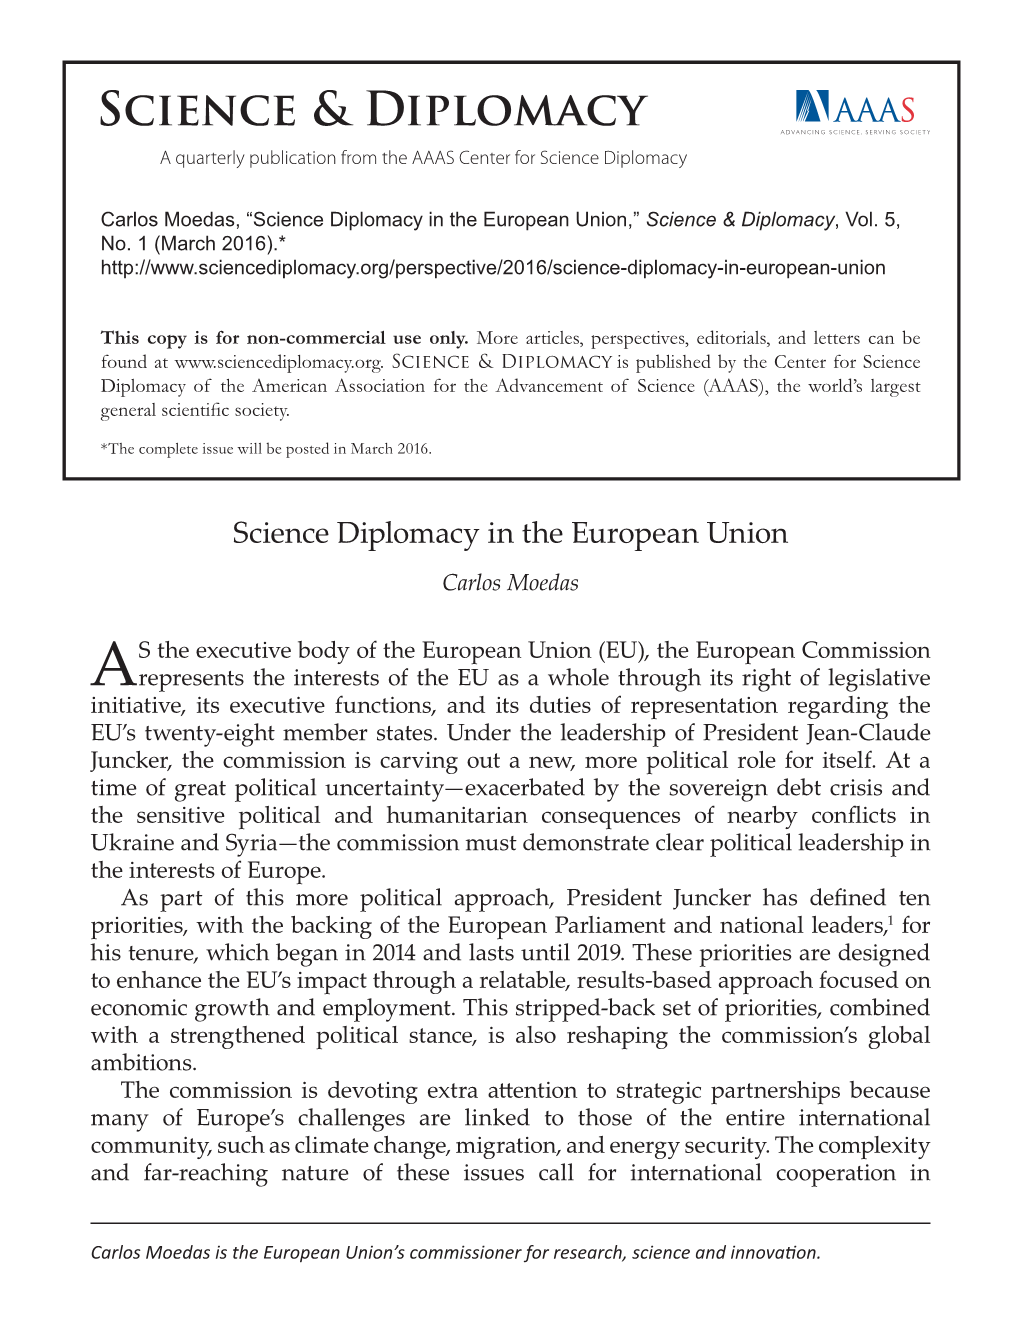 Science Diplomacy in the European Union,” Science & Diplomacy, Vol